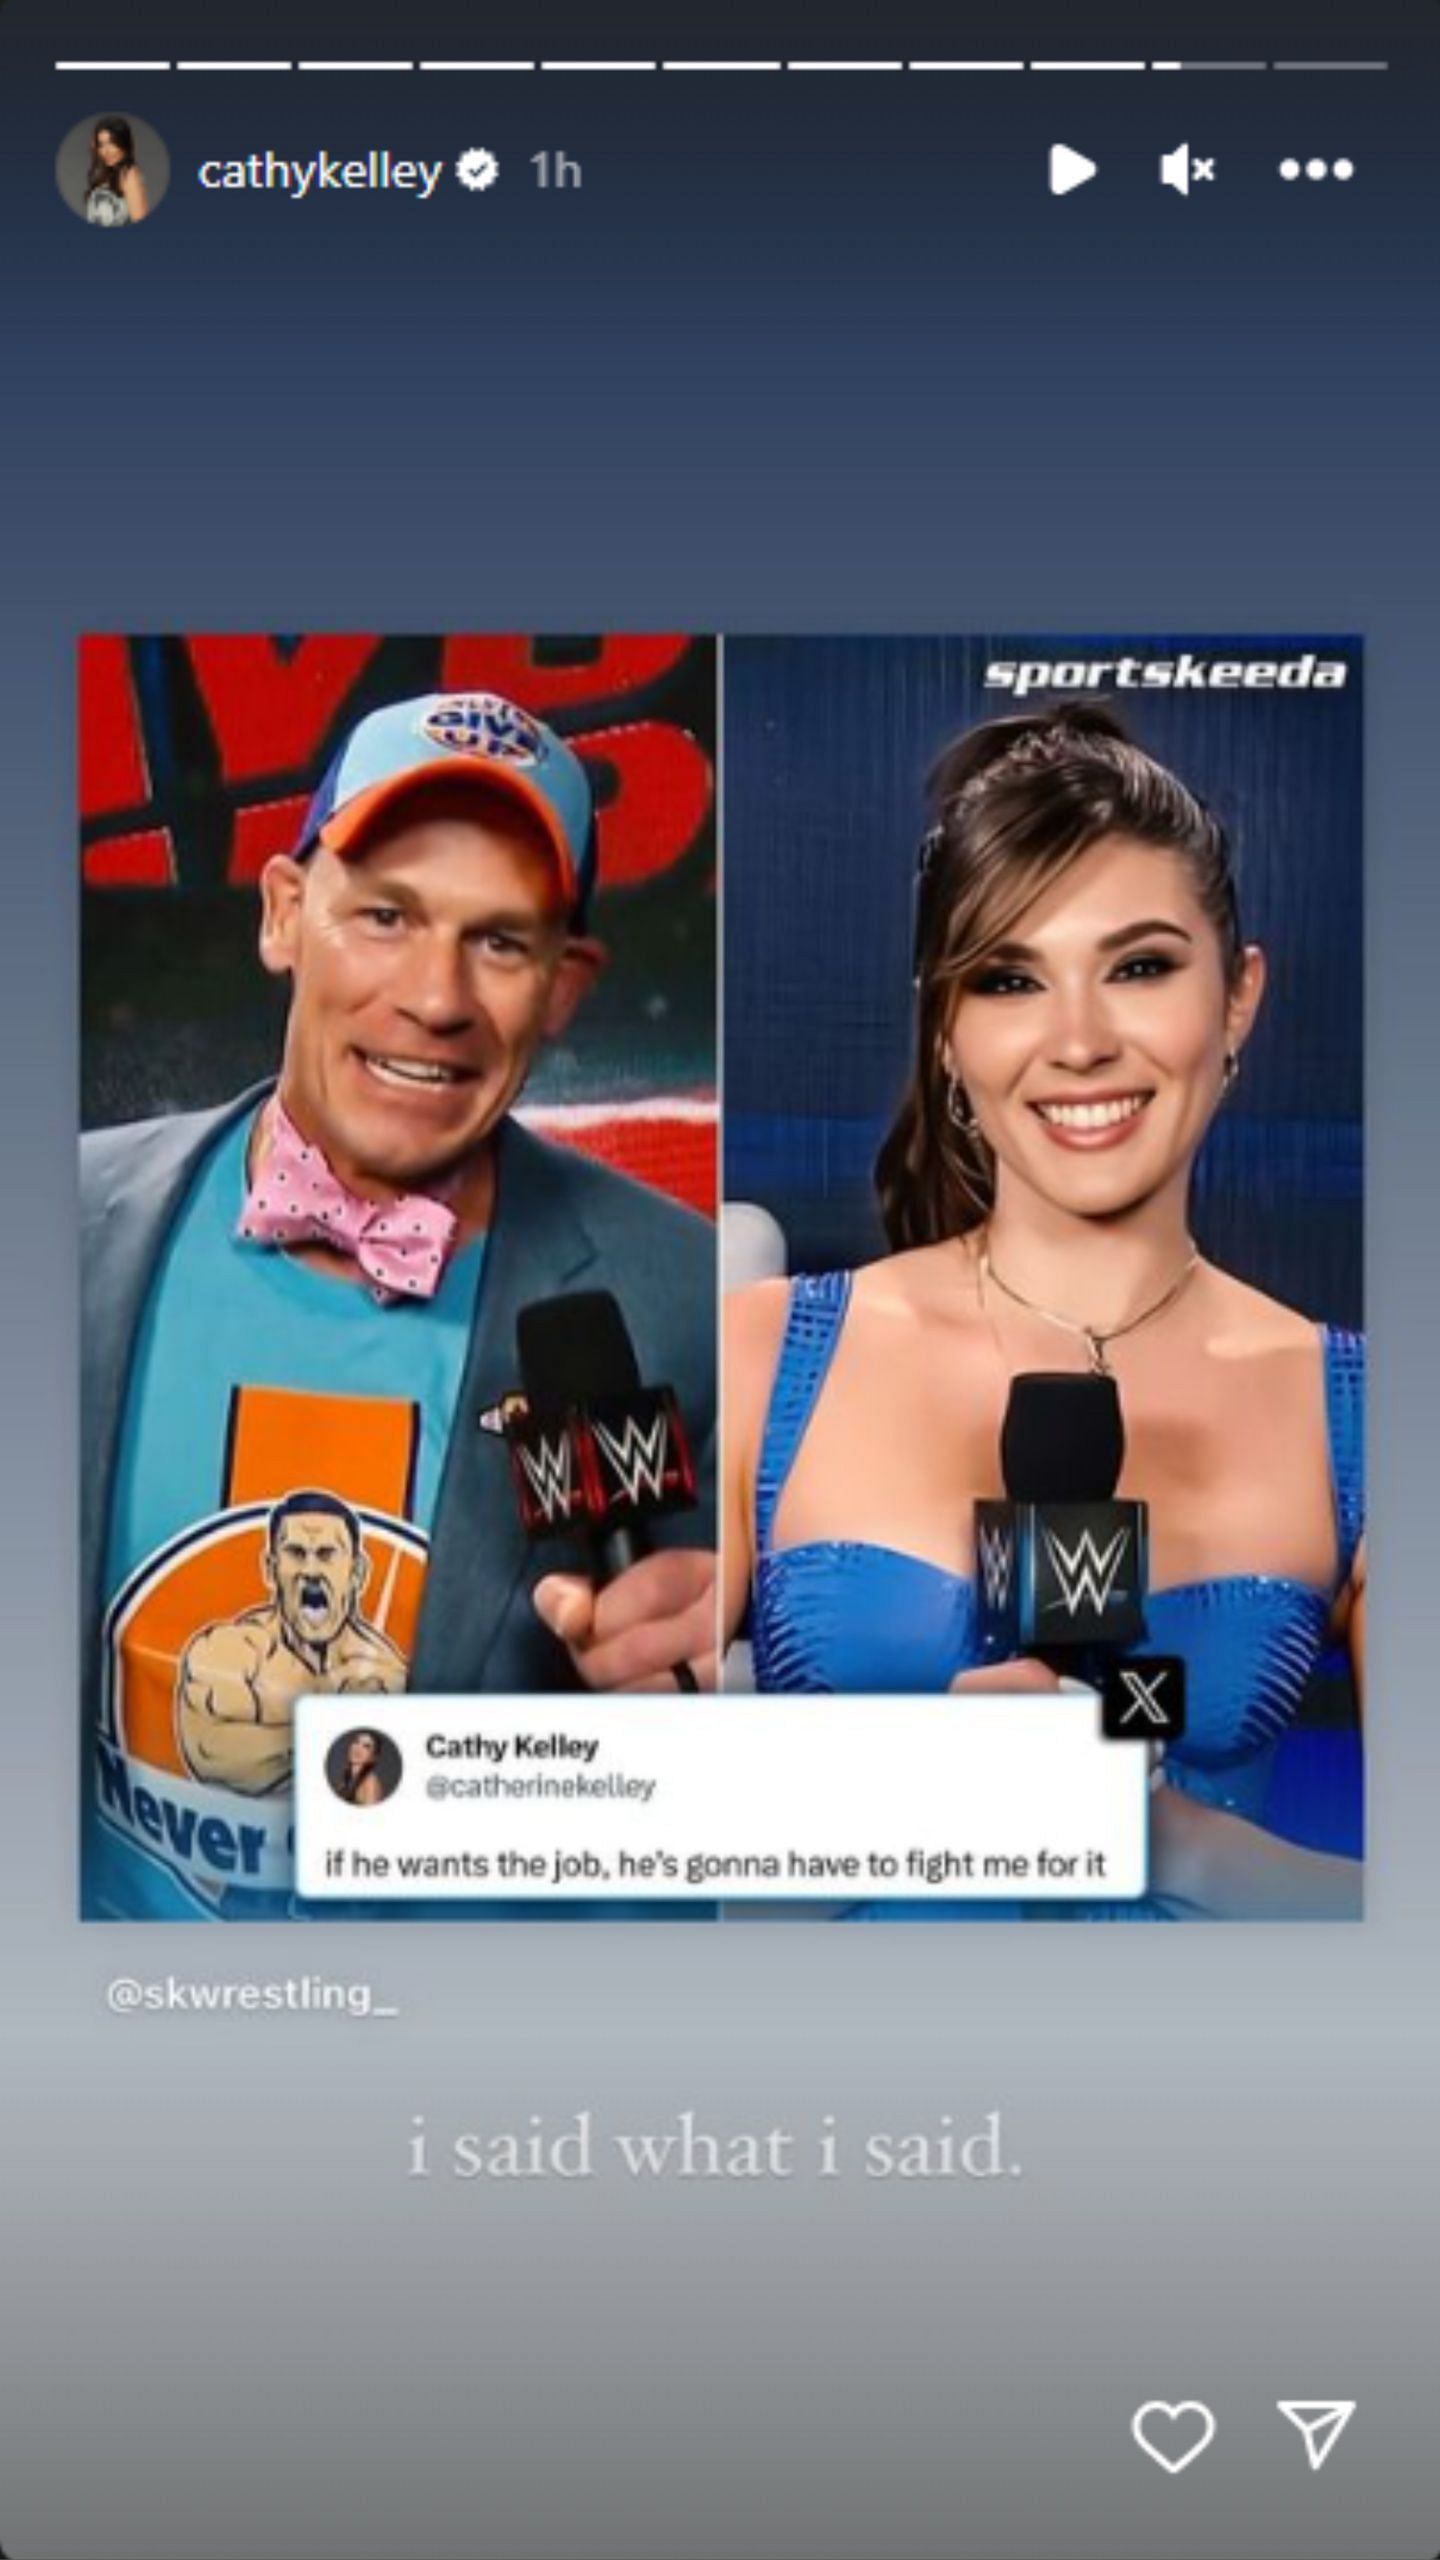 Cathy Kelley on what he recently said about John Cena.